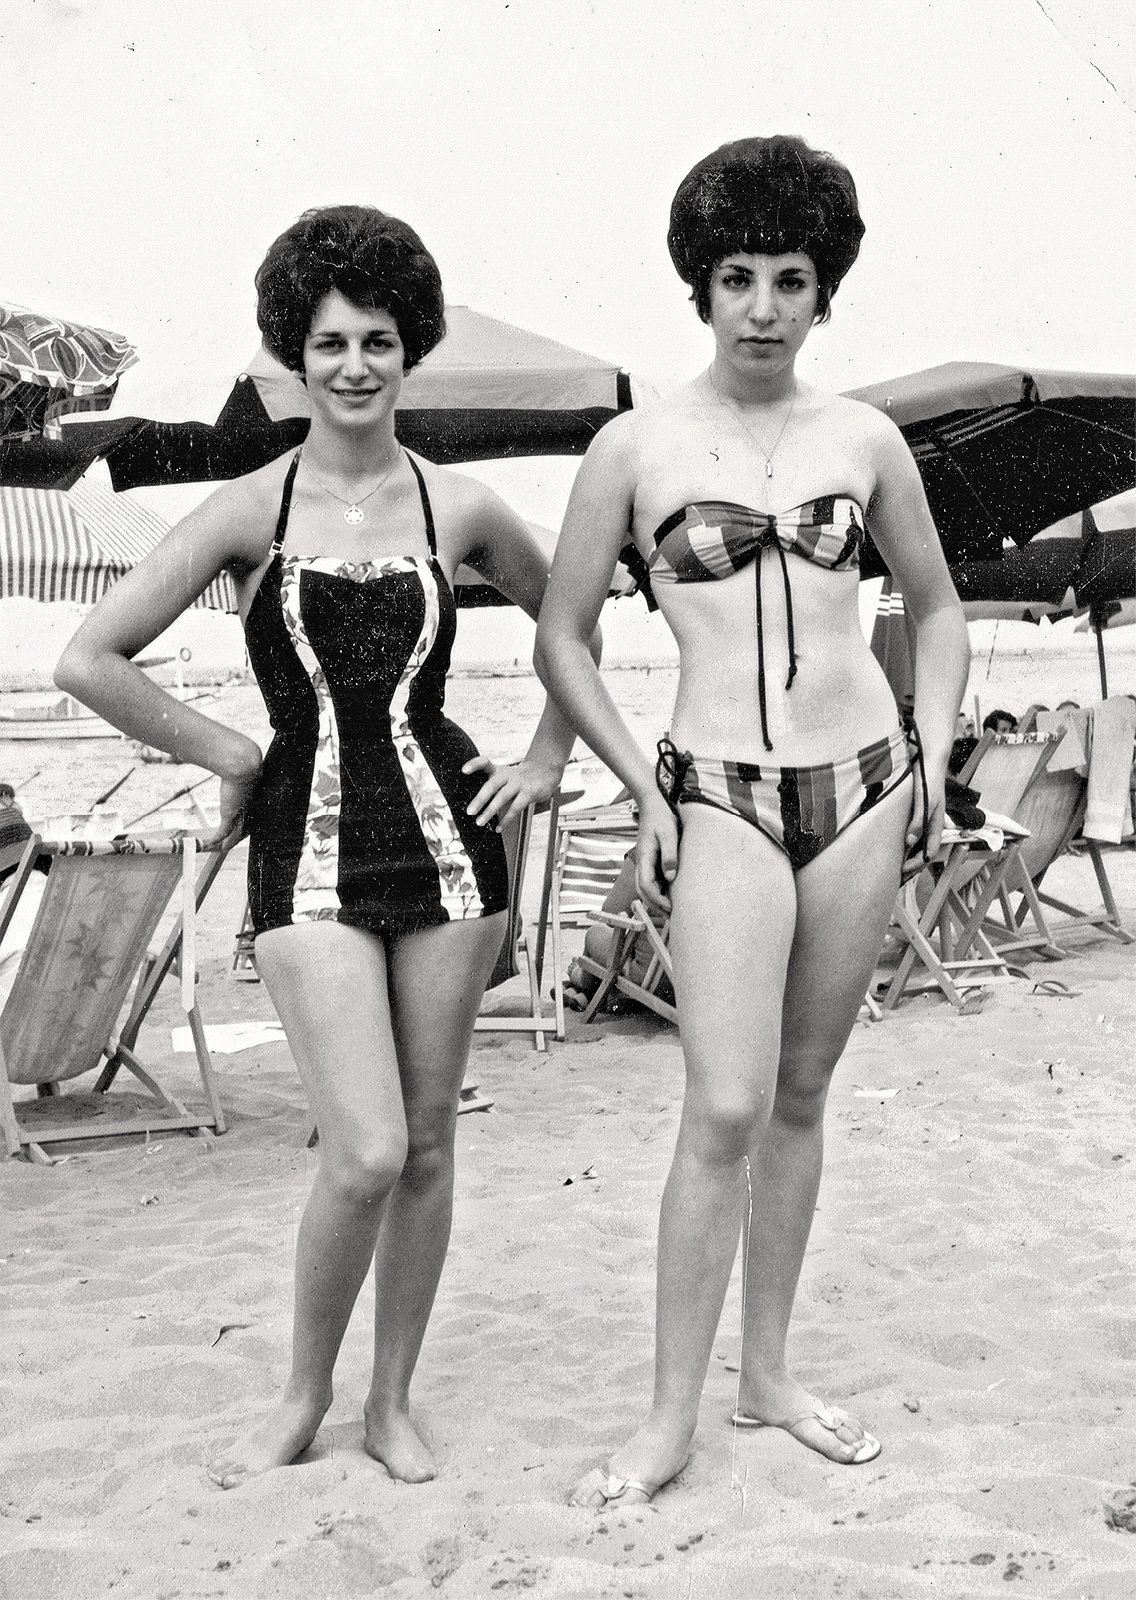 Lila Shaper and Anne Mitofsky pictured on the beach. Anne and Lila were best friends. This photograph is from a vacation in Italy, early 1960s.